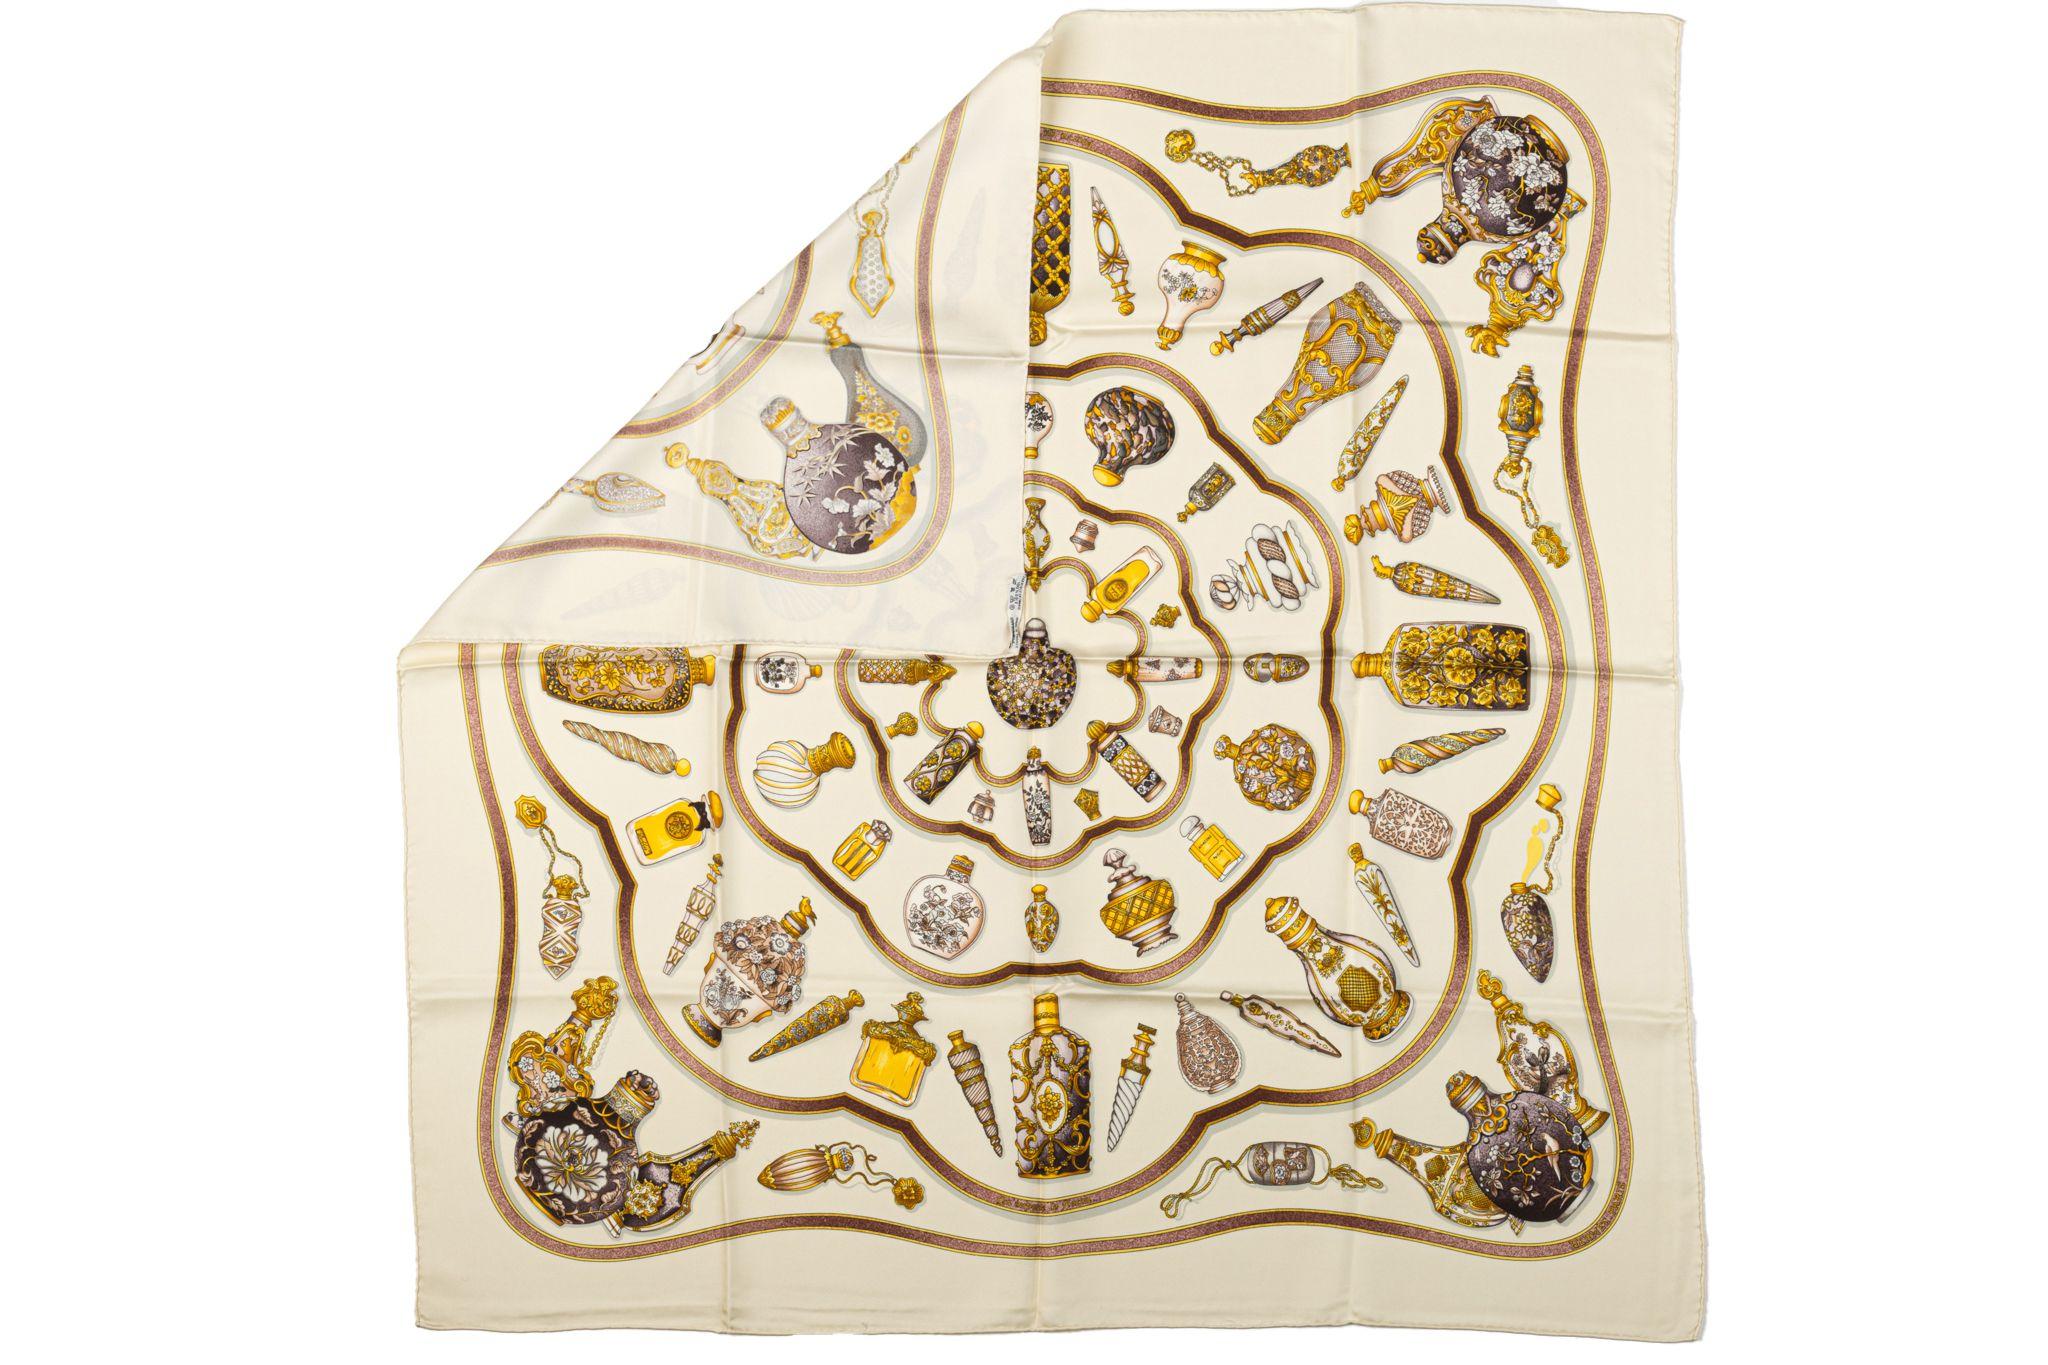 Hermès silk twill Qu' Importe Le Flacon scarf. Hand rolled edges. Does not include box.